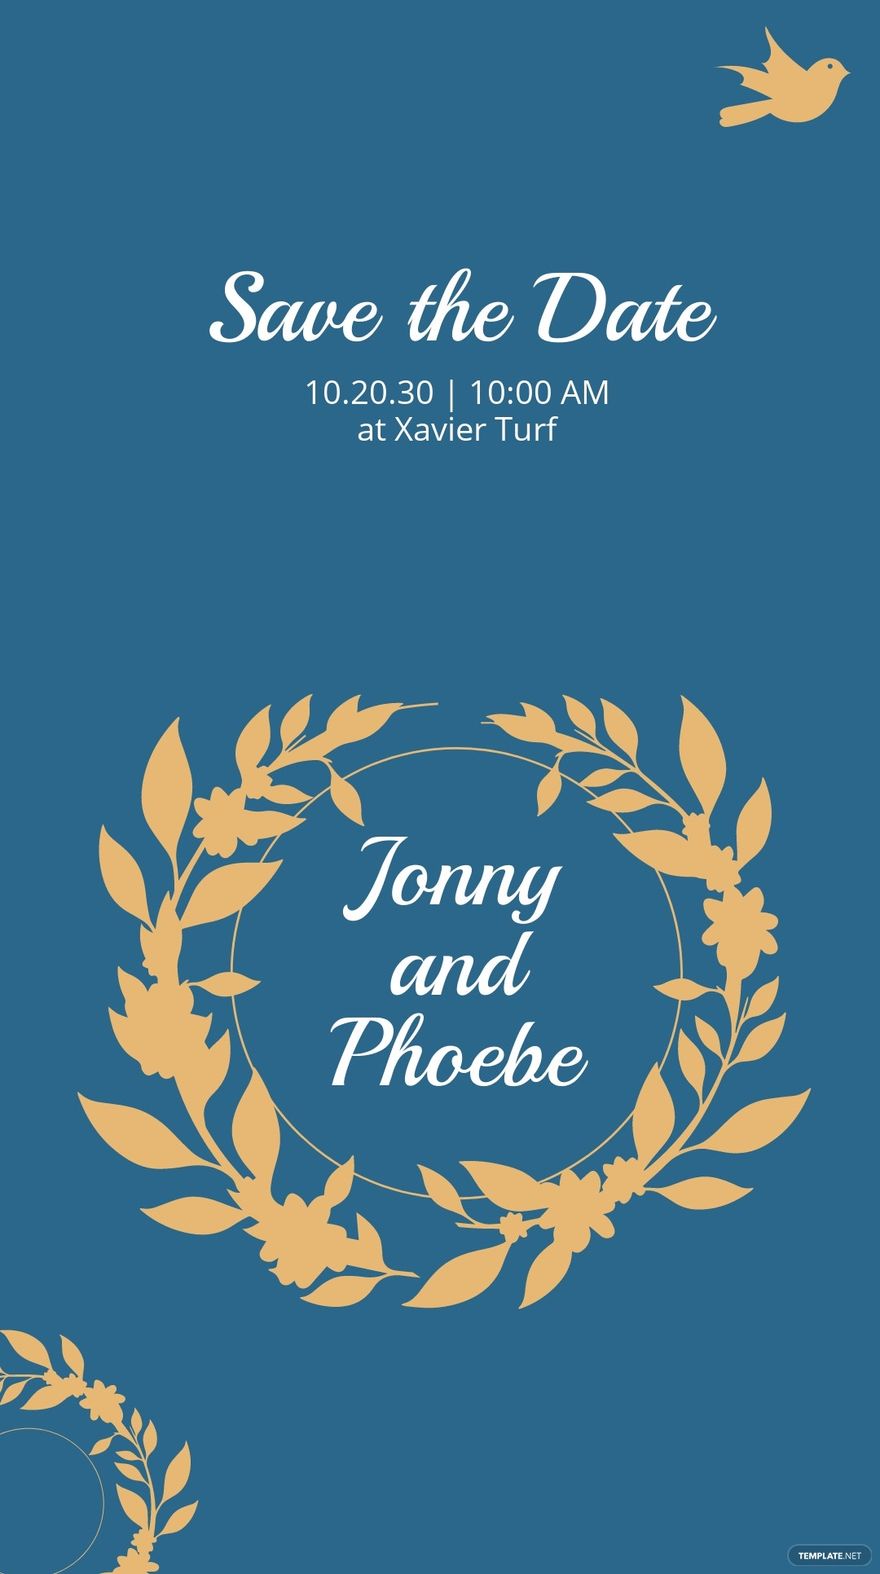 Save The Date Snapchat Geofilter Template